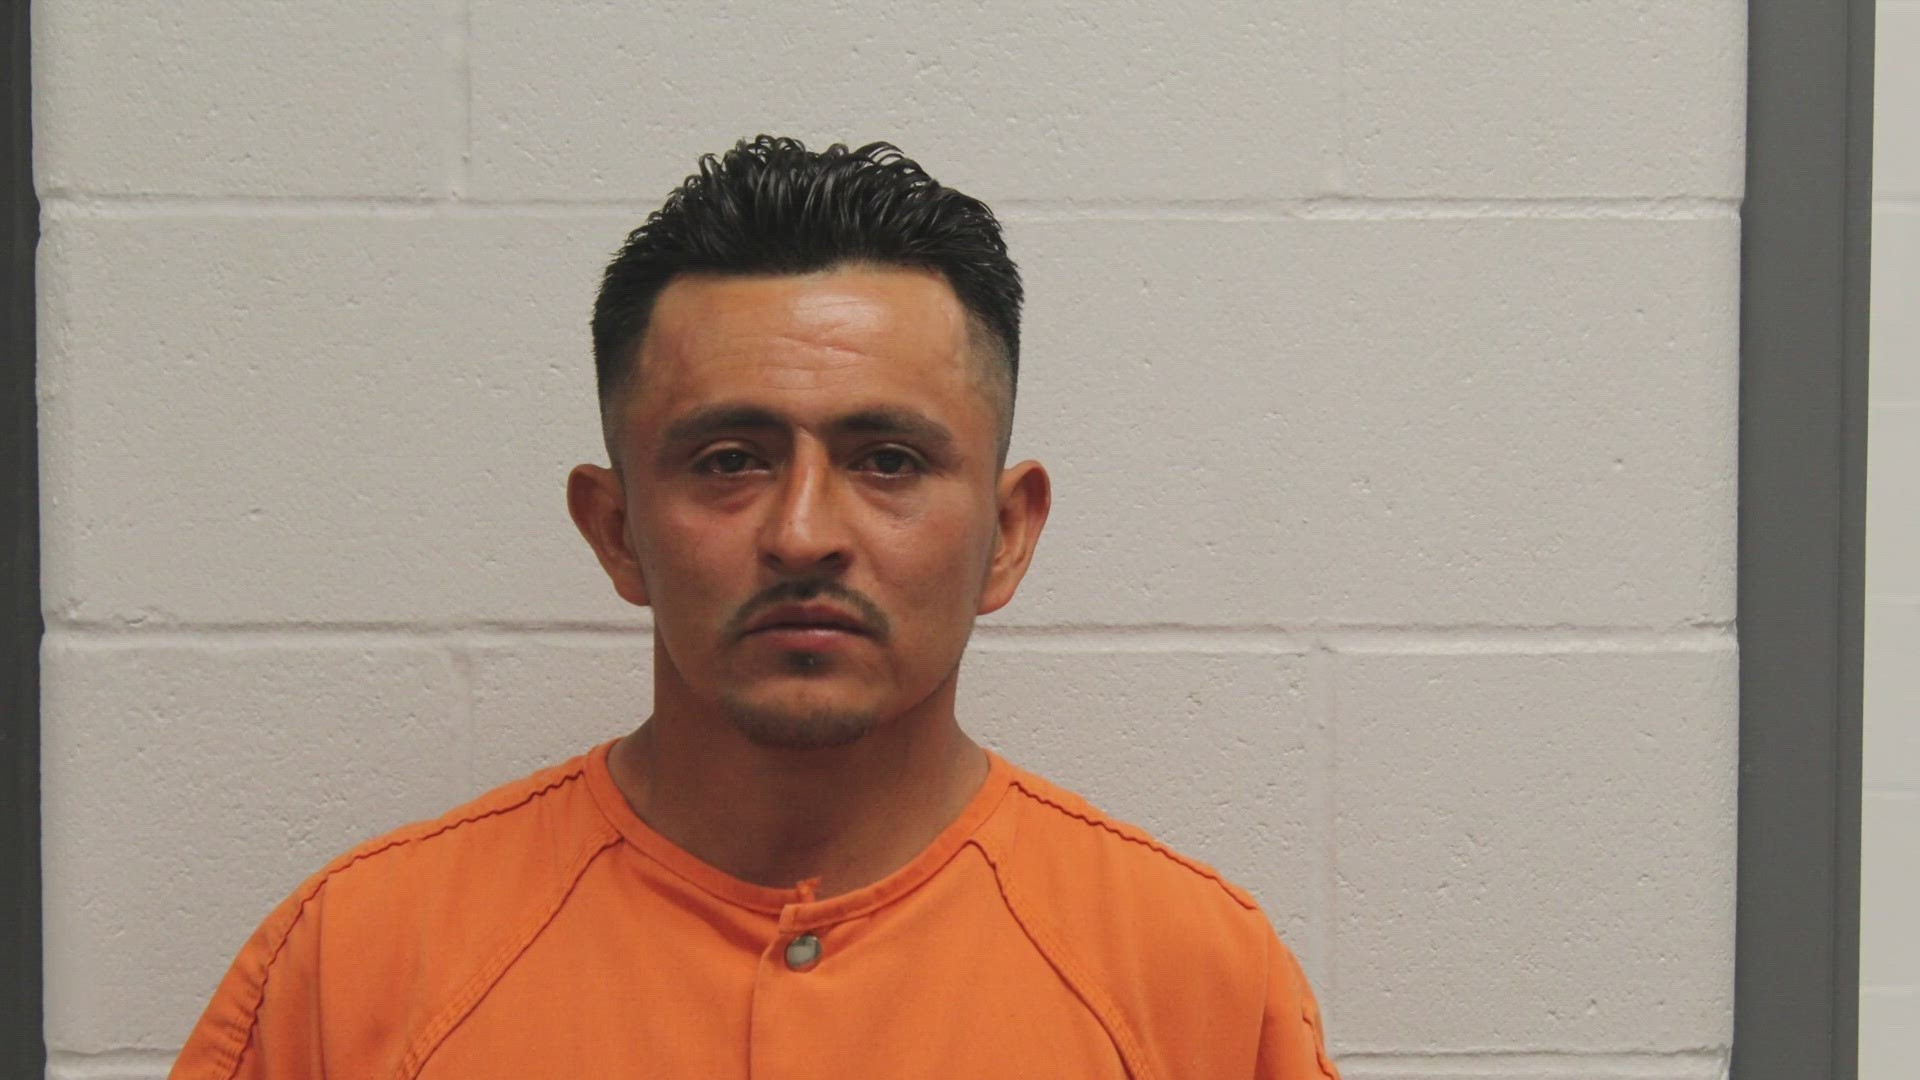 A man is accused of stabbing two people during a fight Saturday afternoon outside an O'Fallon laundromat. St. Charles County prosecutors charged Jose Barrera.